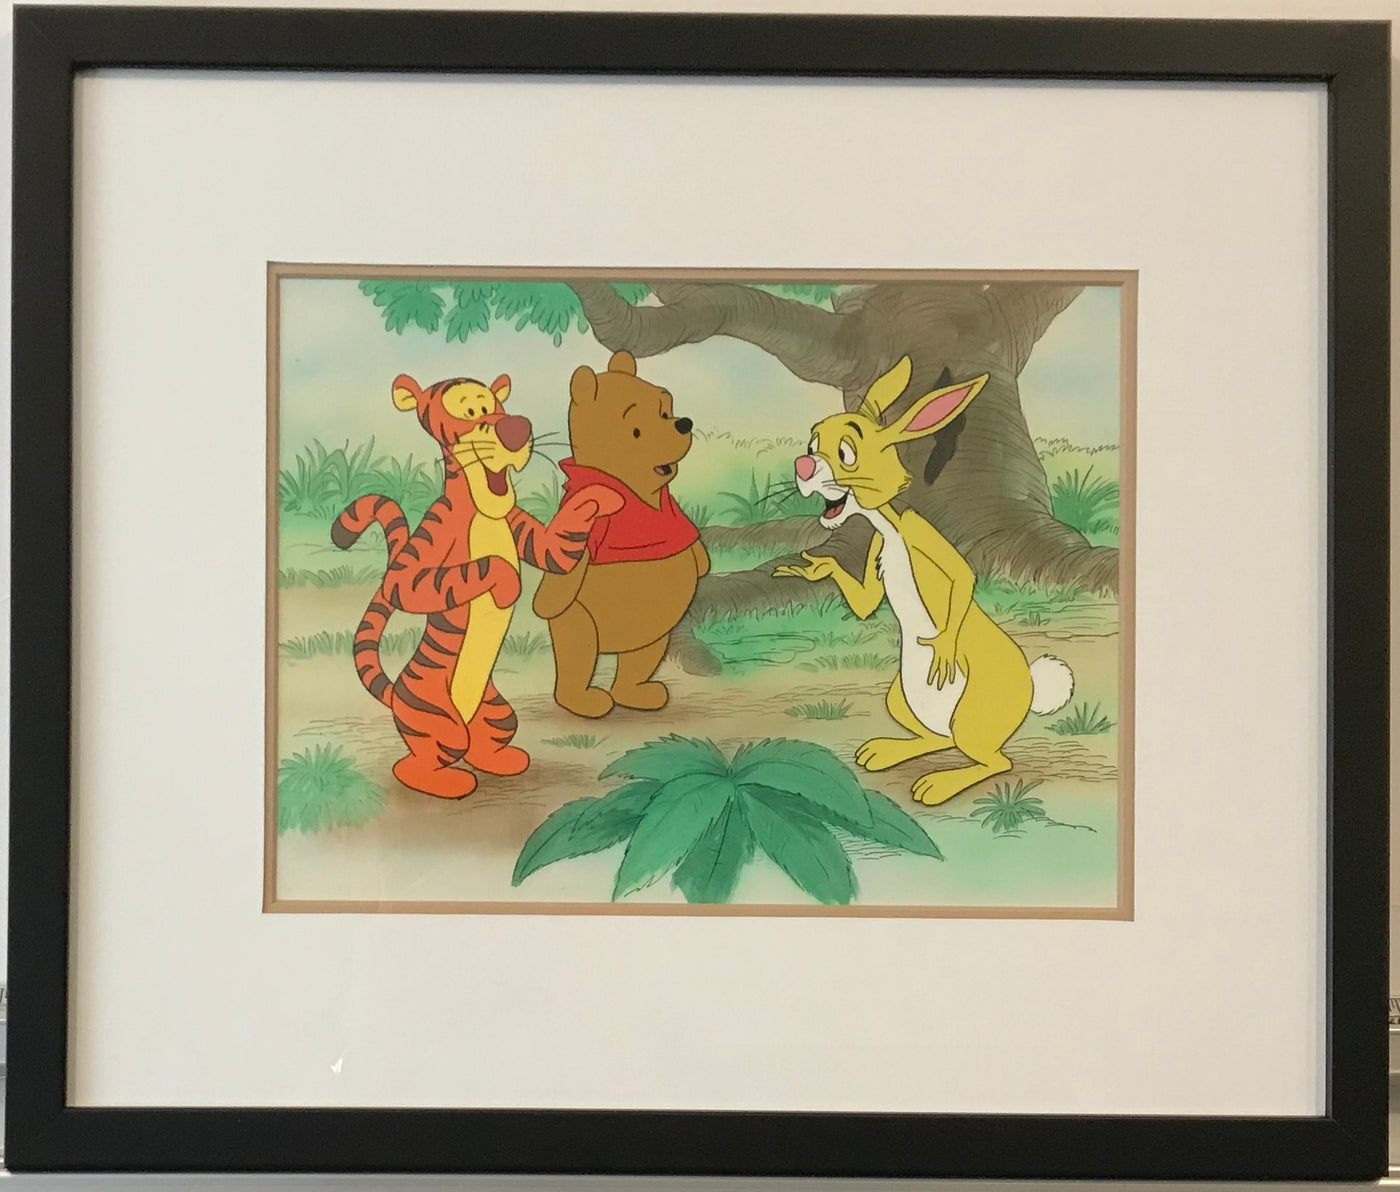 Original Walt Disney Educational Television Production Cel from Winnie the Pooh featuring Tigger, Winnie the Pooh, and Rabbit